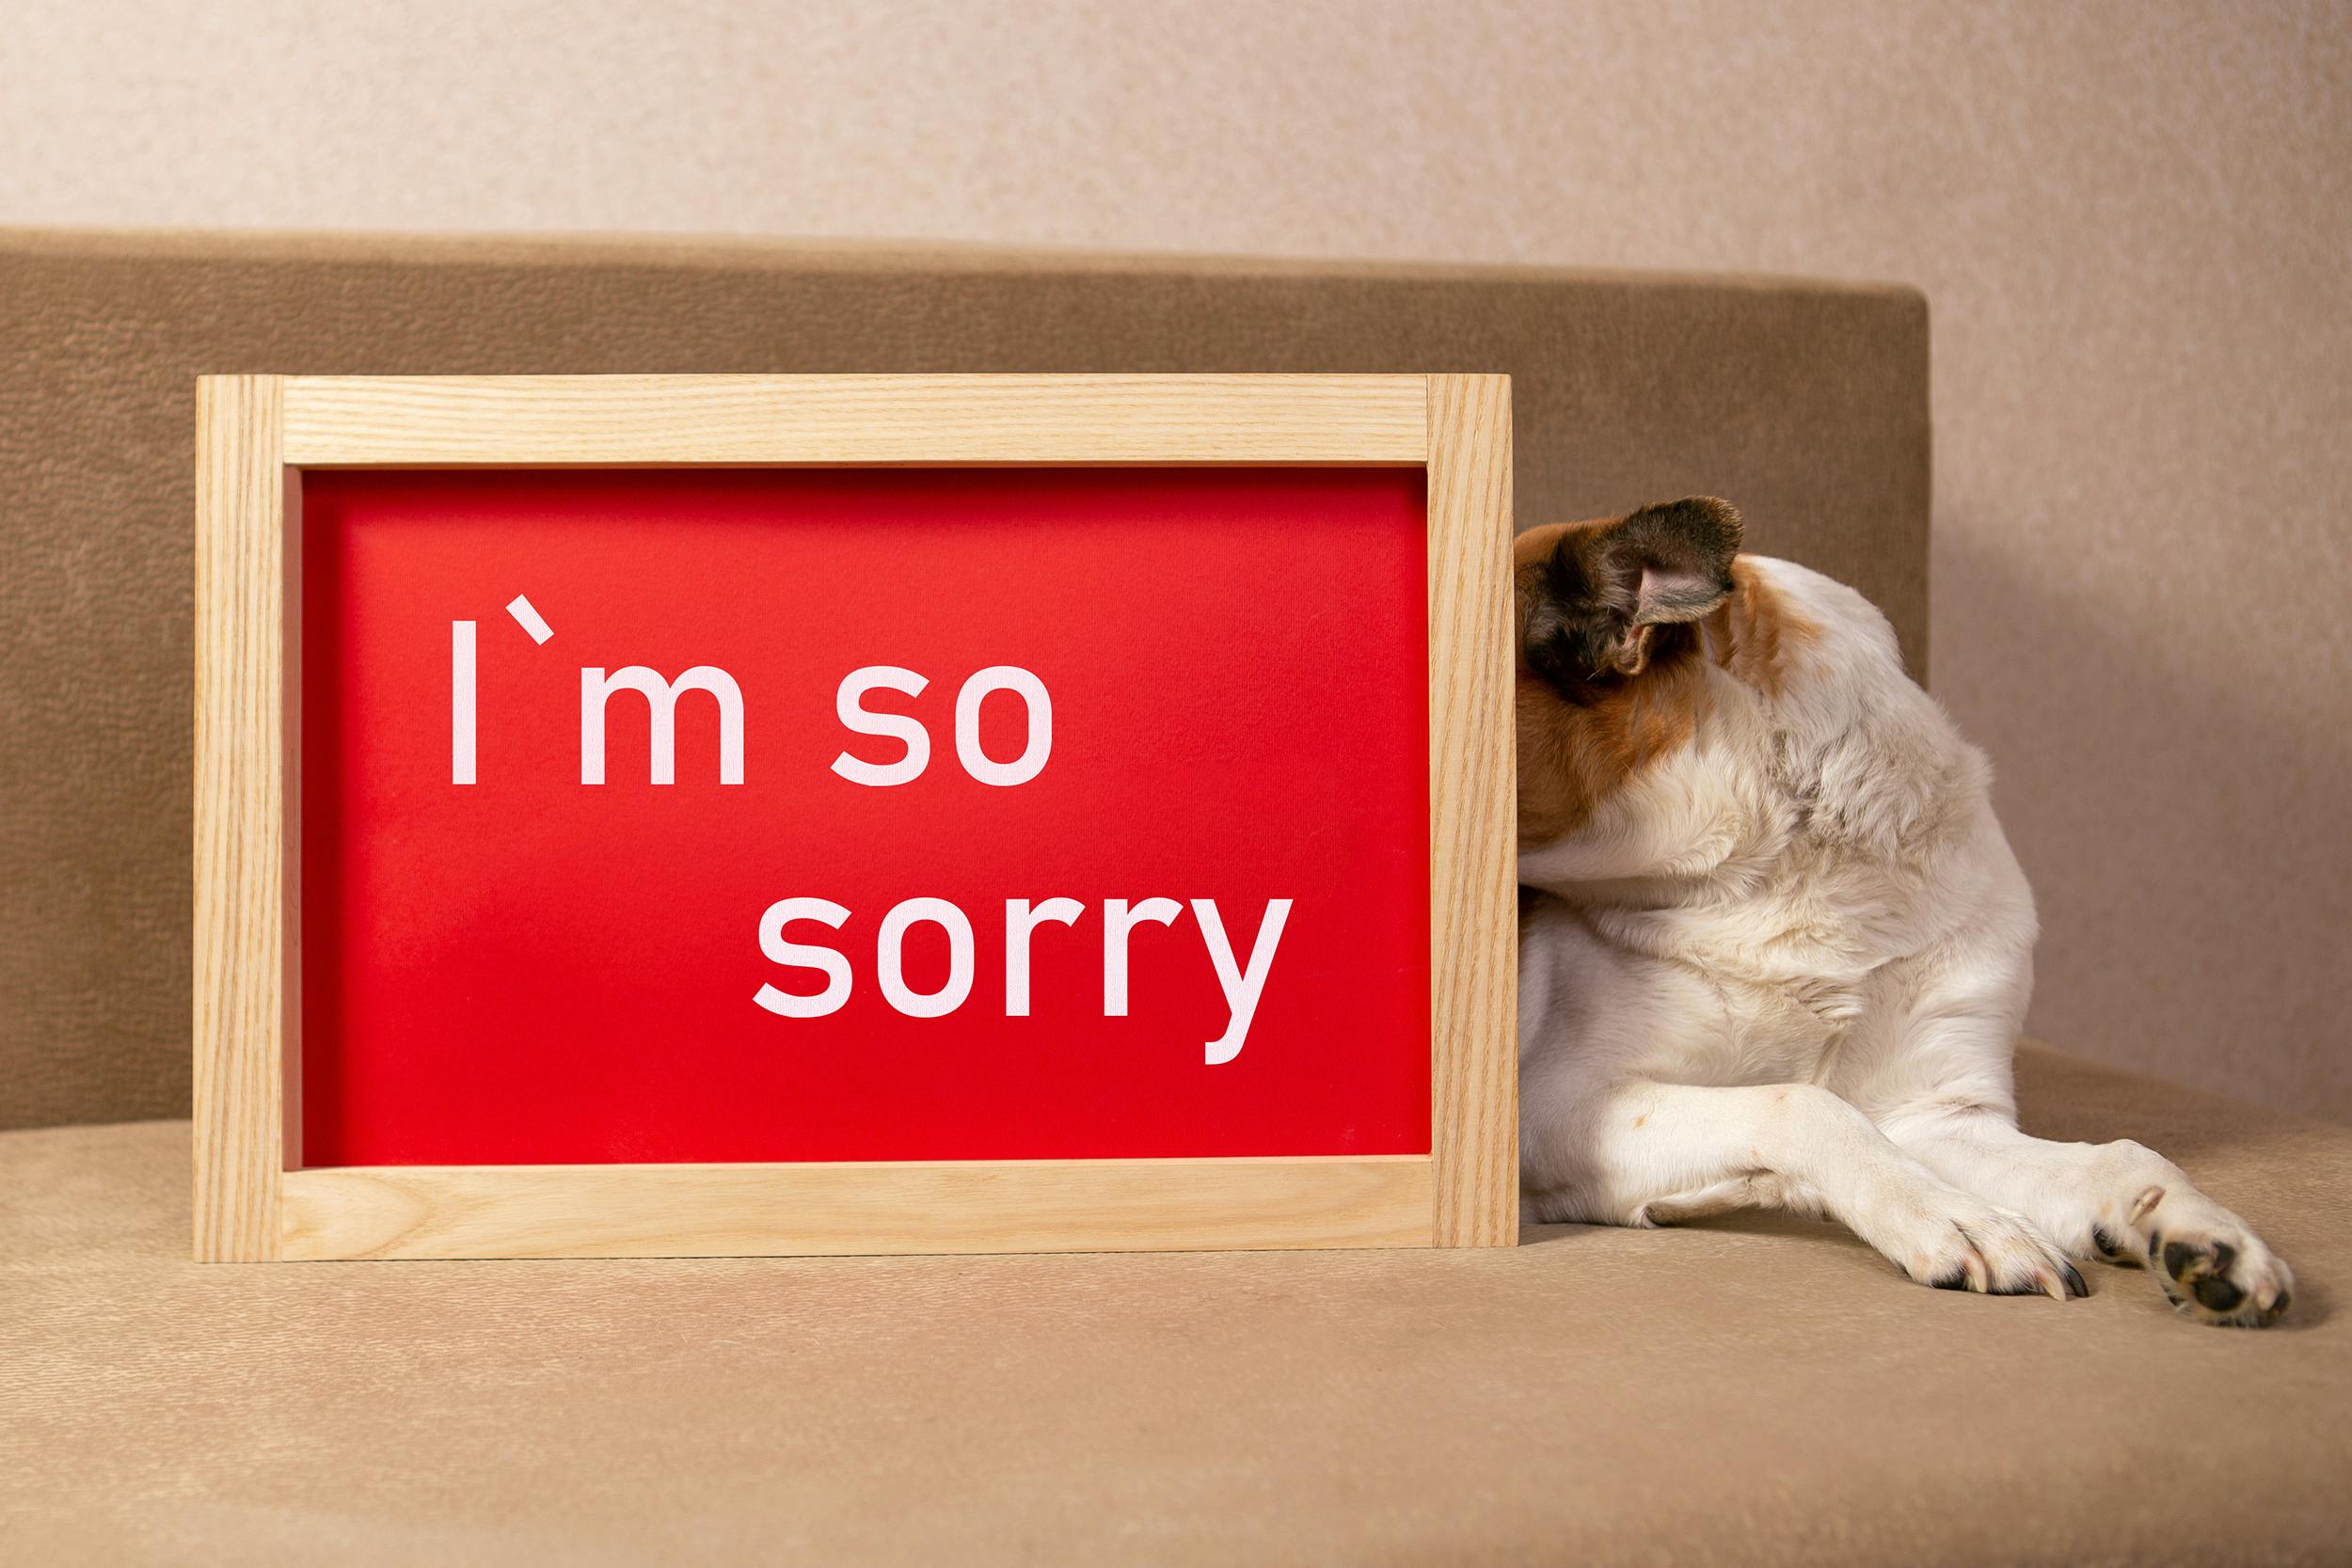 Dog hiding behind a sign that reads "I'm so sorry."